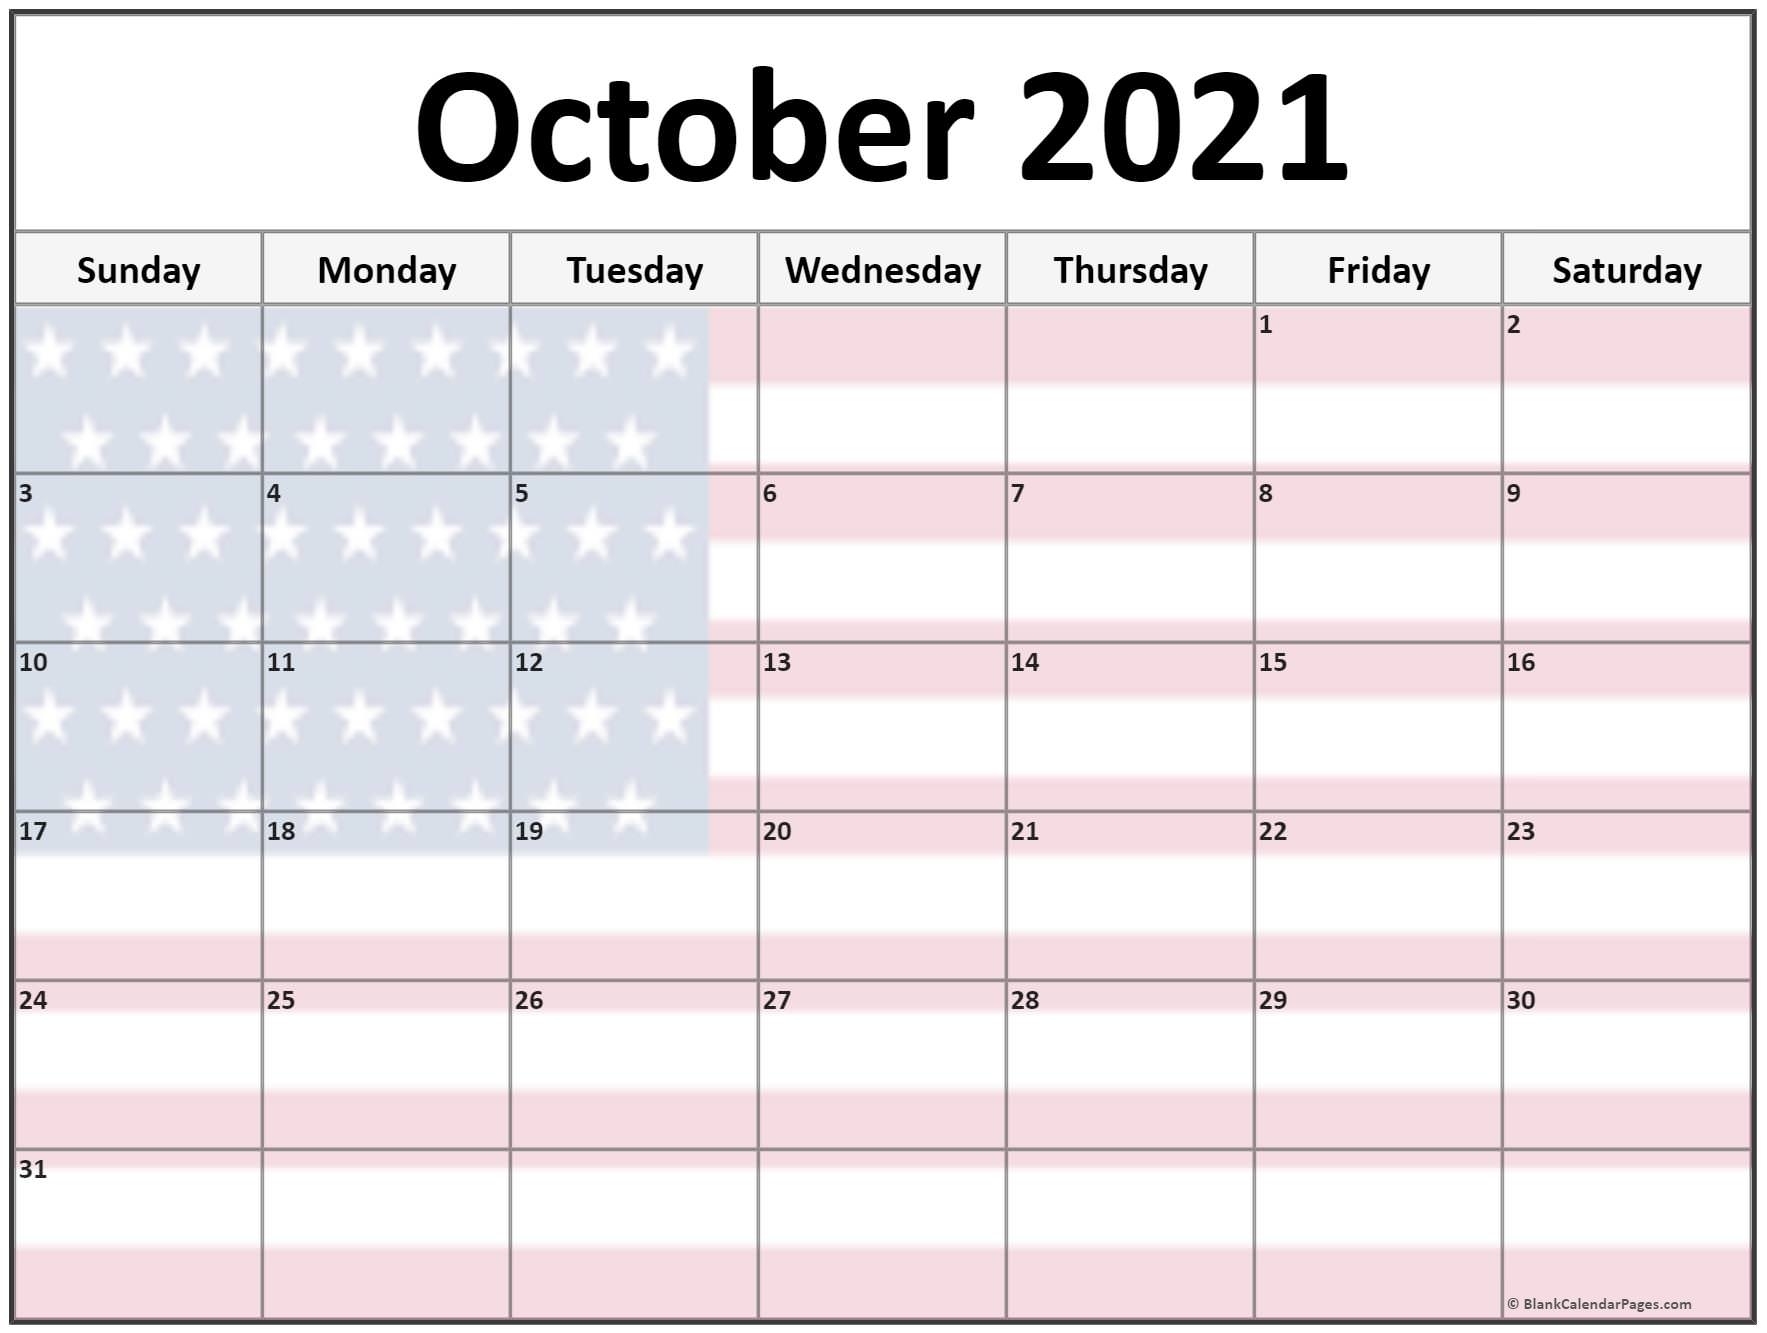 Collection Of October 2021 Photo Calendars With Image Filters. Cute October 2021 Calendar